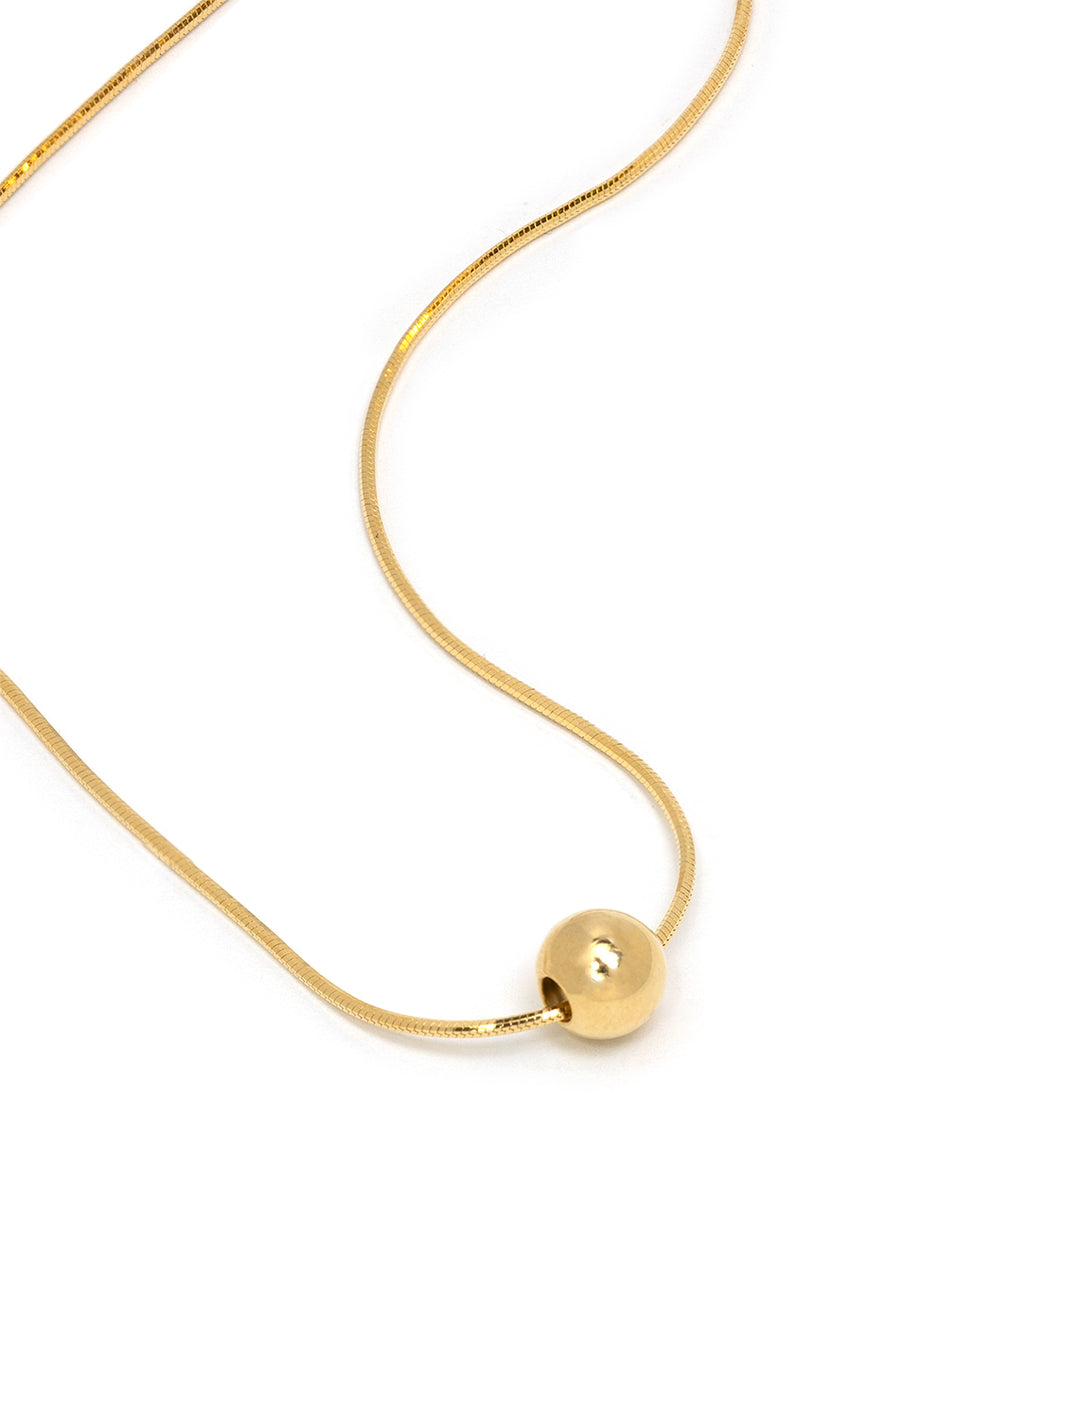 Stylized laydown of Tai's snake chain with single gold ball necklace.